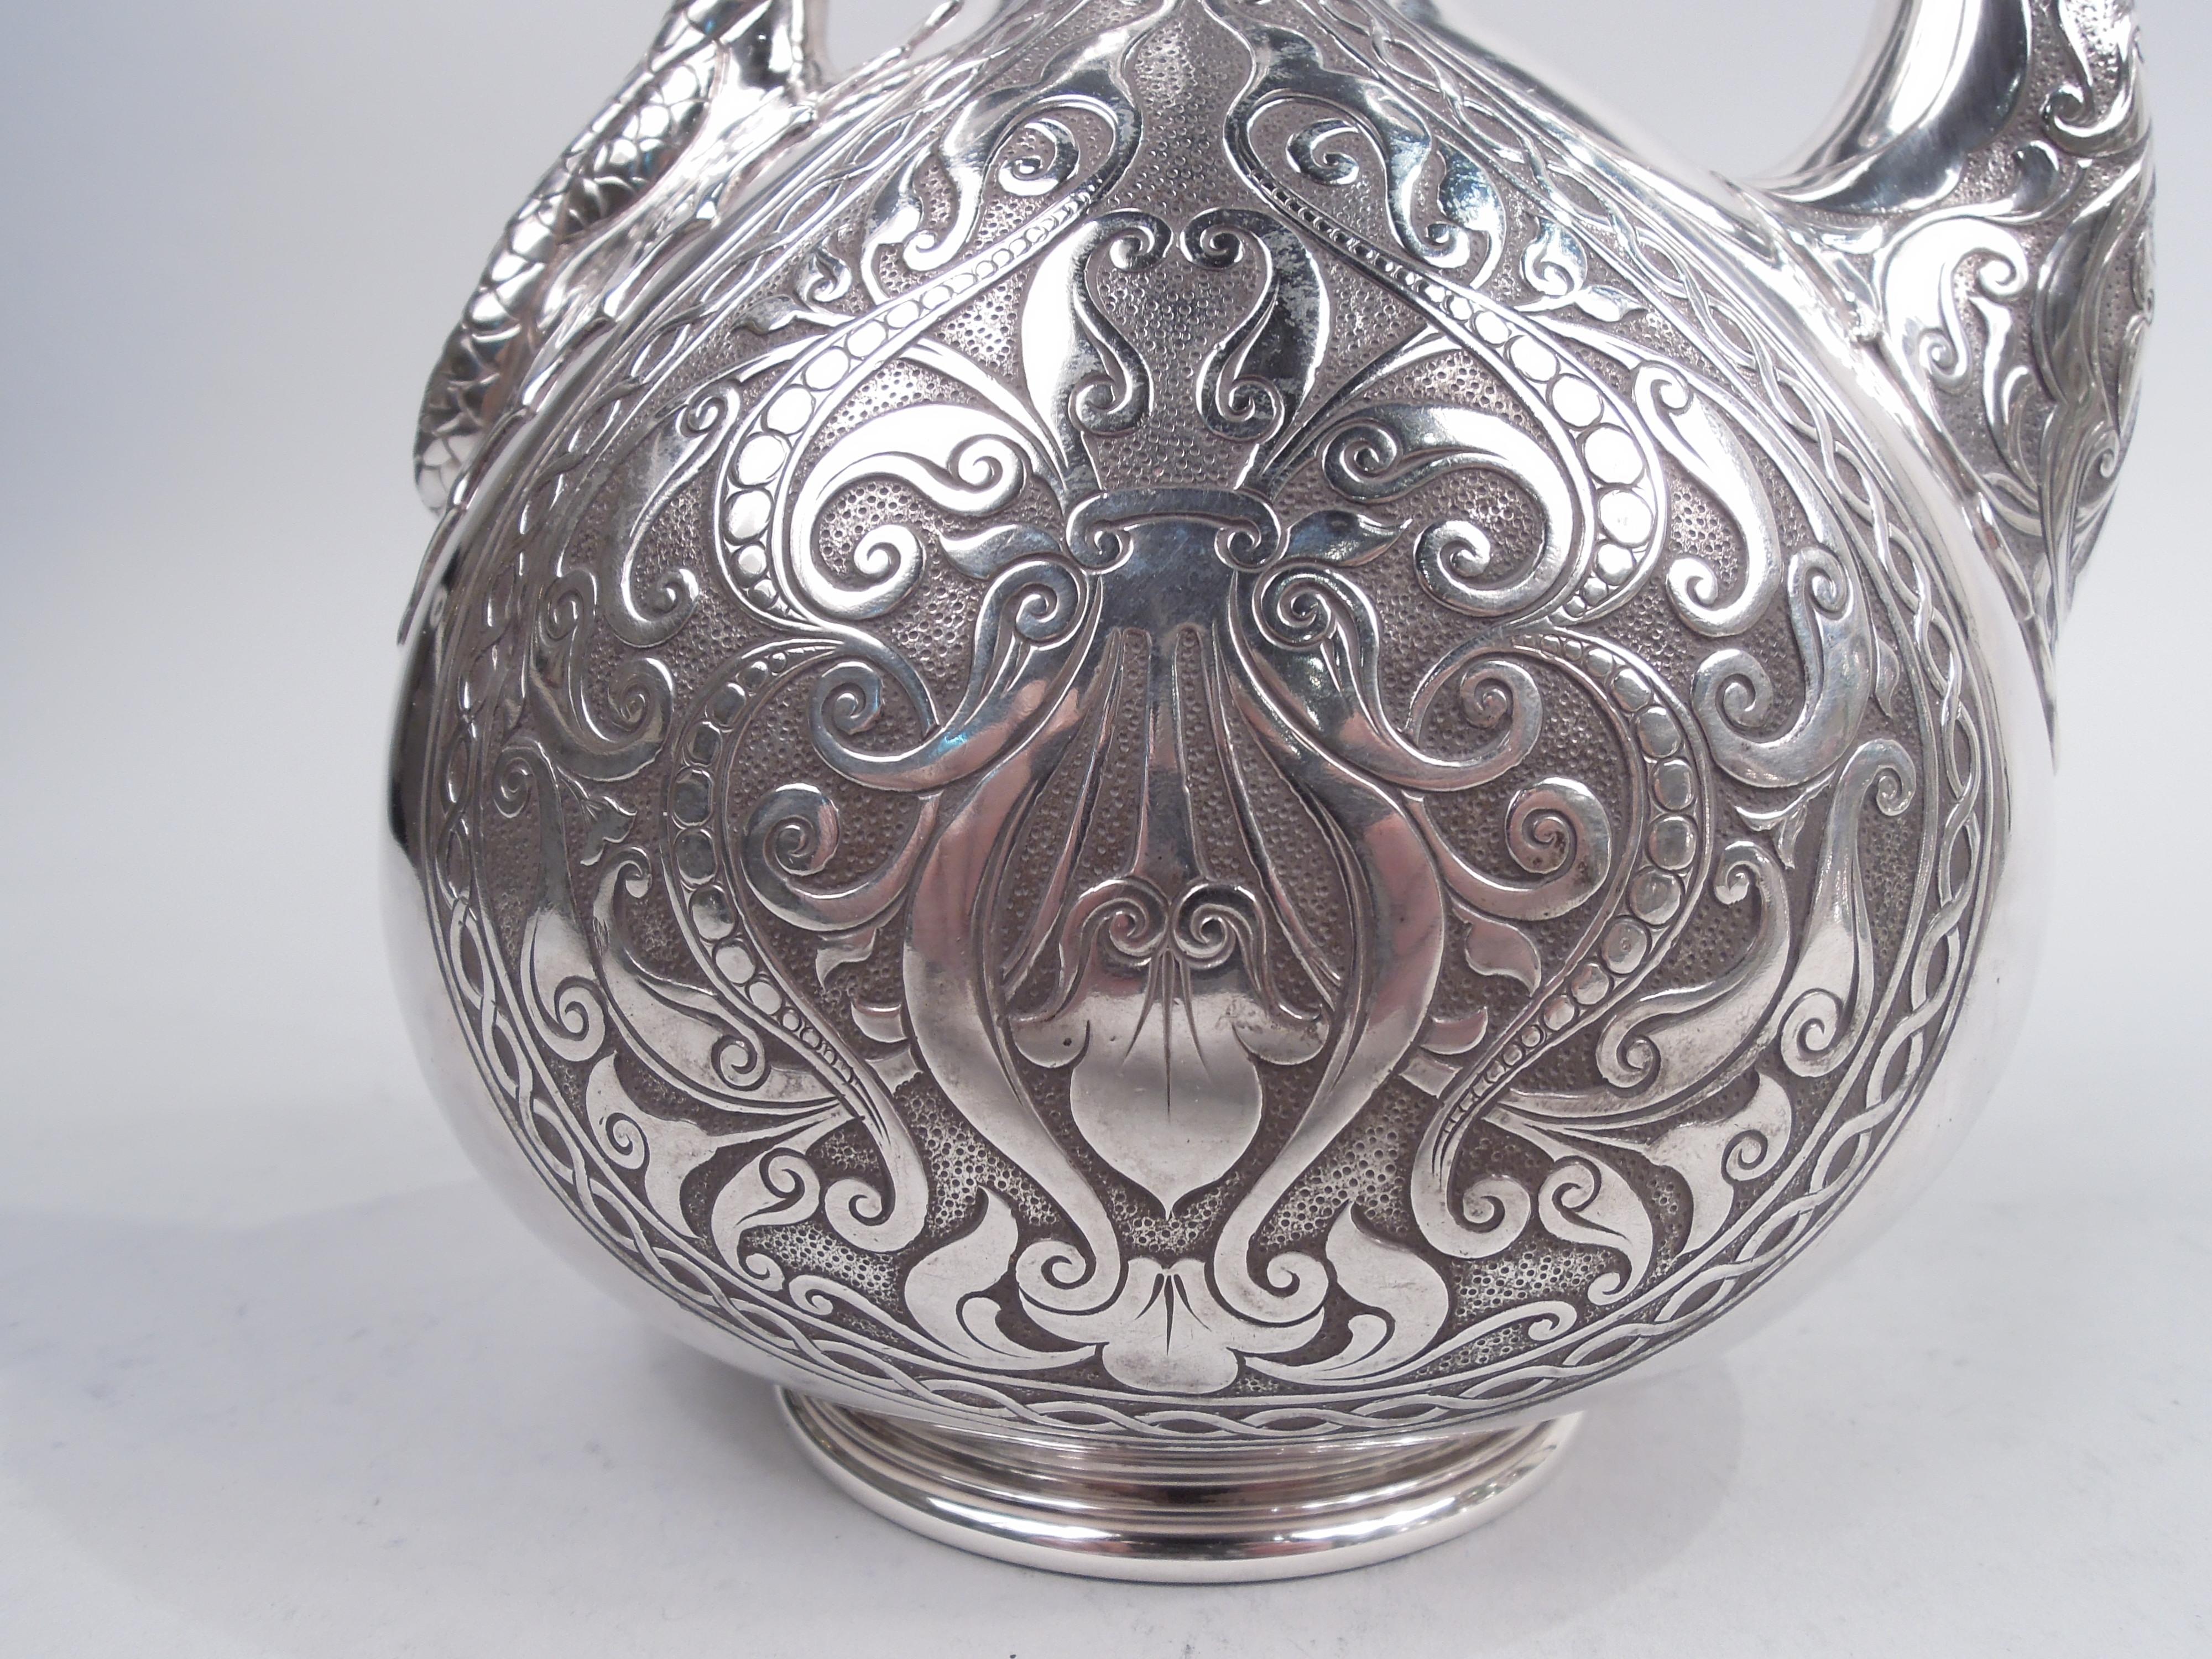 Antique Gorham Exotic Turkish Sterling Silver Coffeepot, 1900 For Sale 4